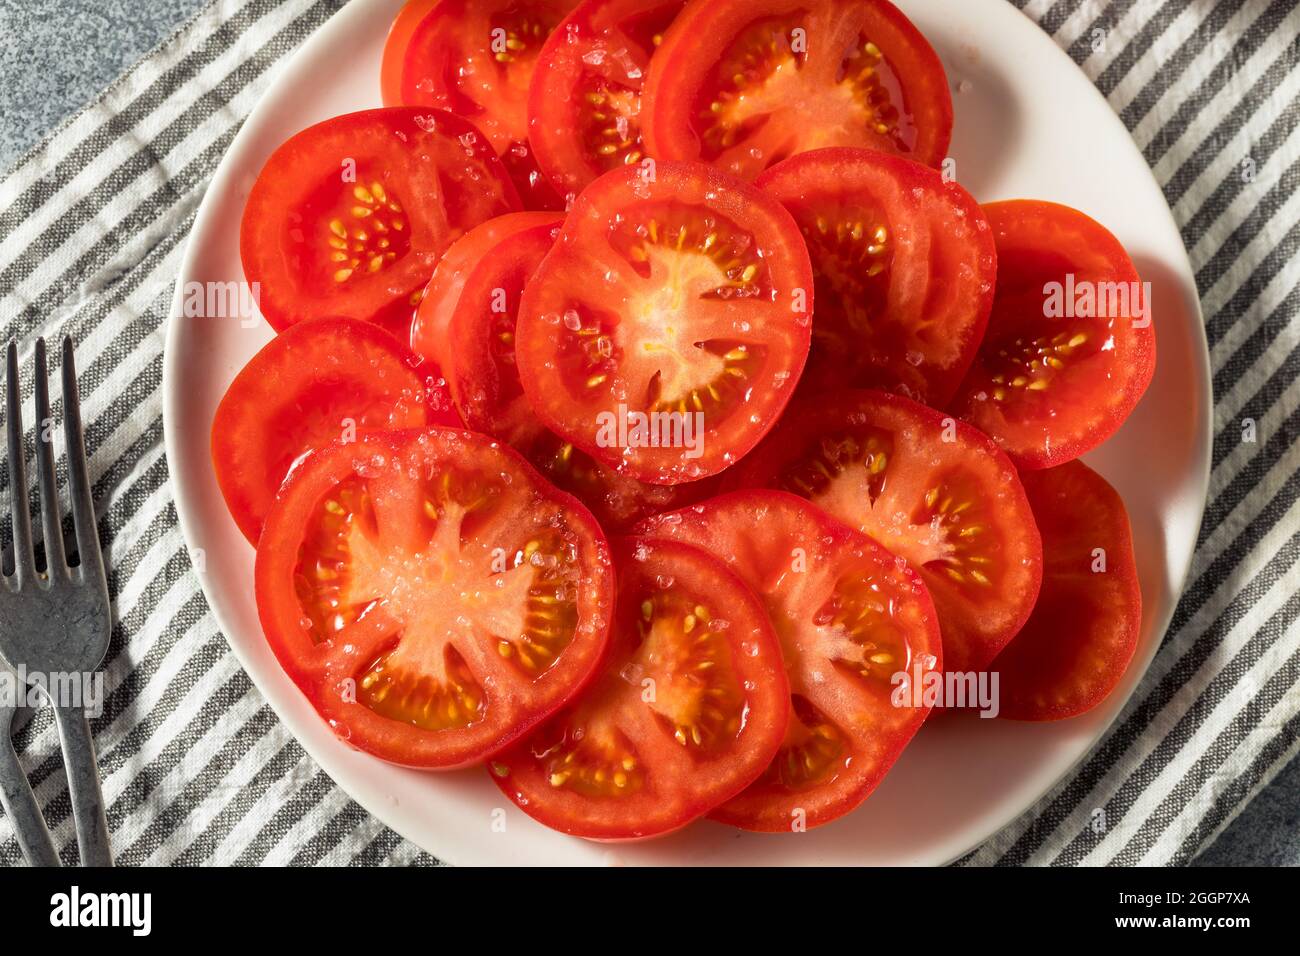 Healthy Organic Sliced Tomatoes with Salt Ready to Eat Stock Photo